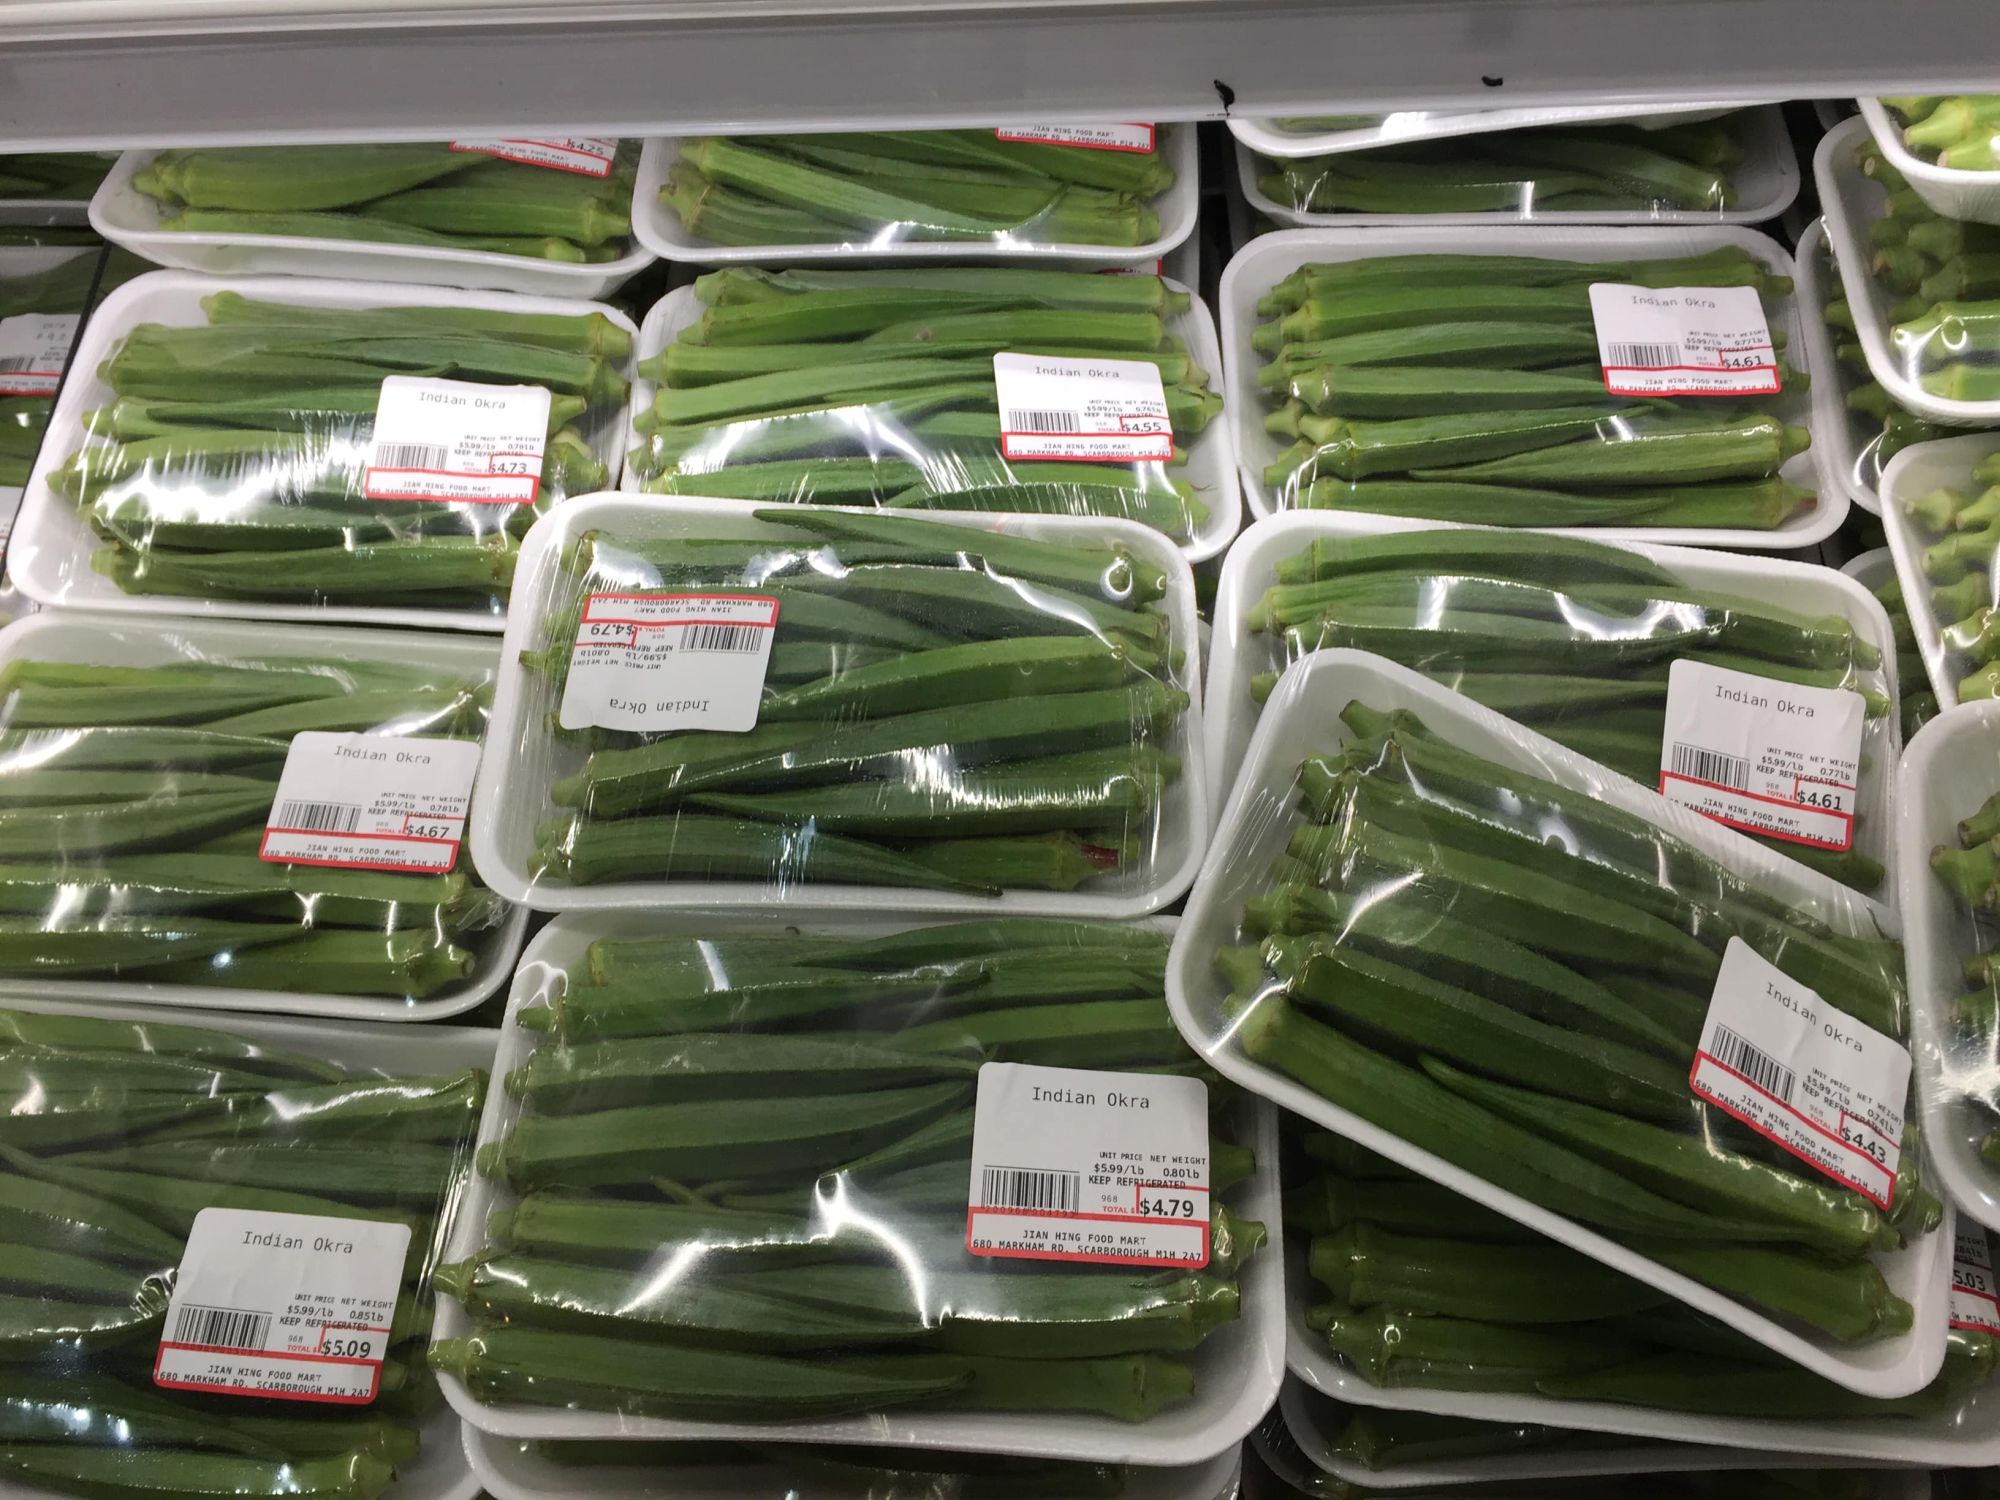 indian okra packaged for sale in a supermarket